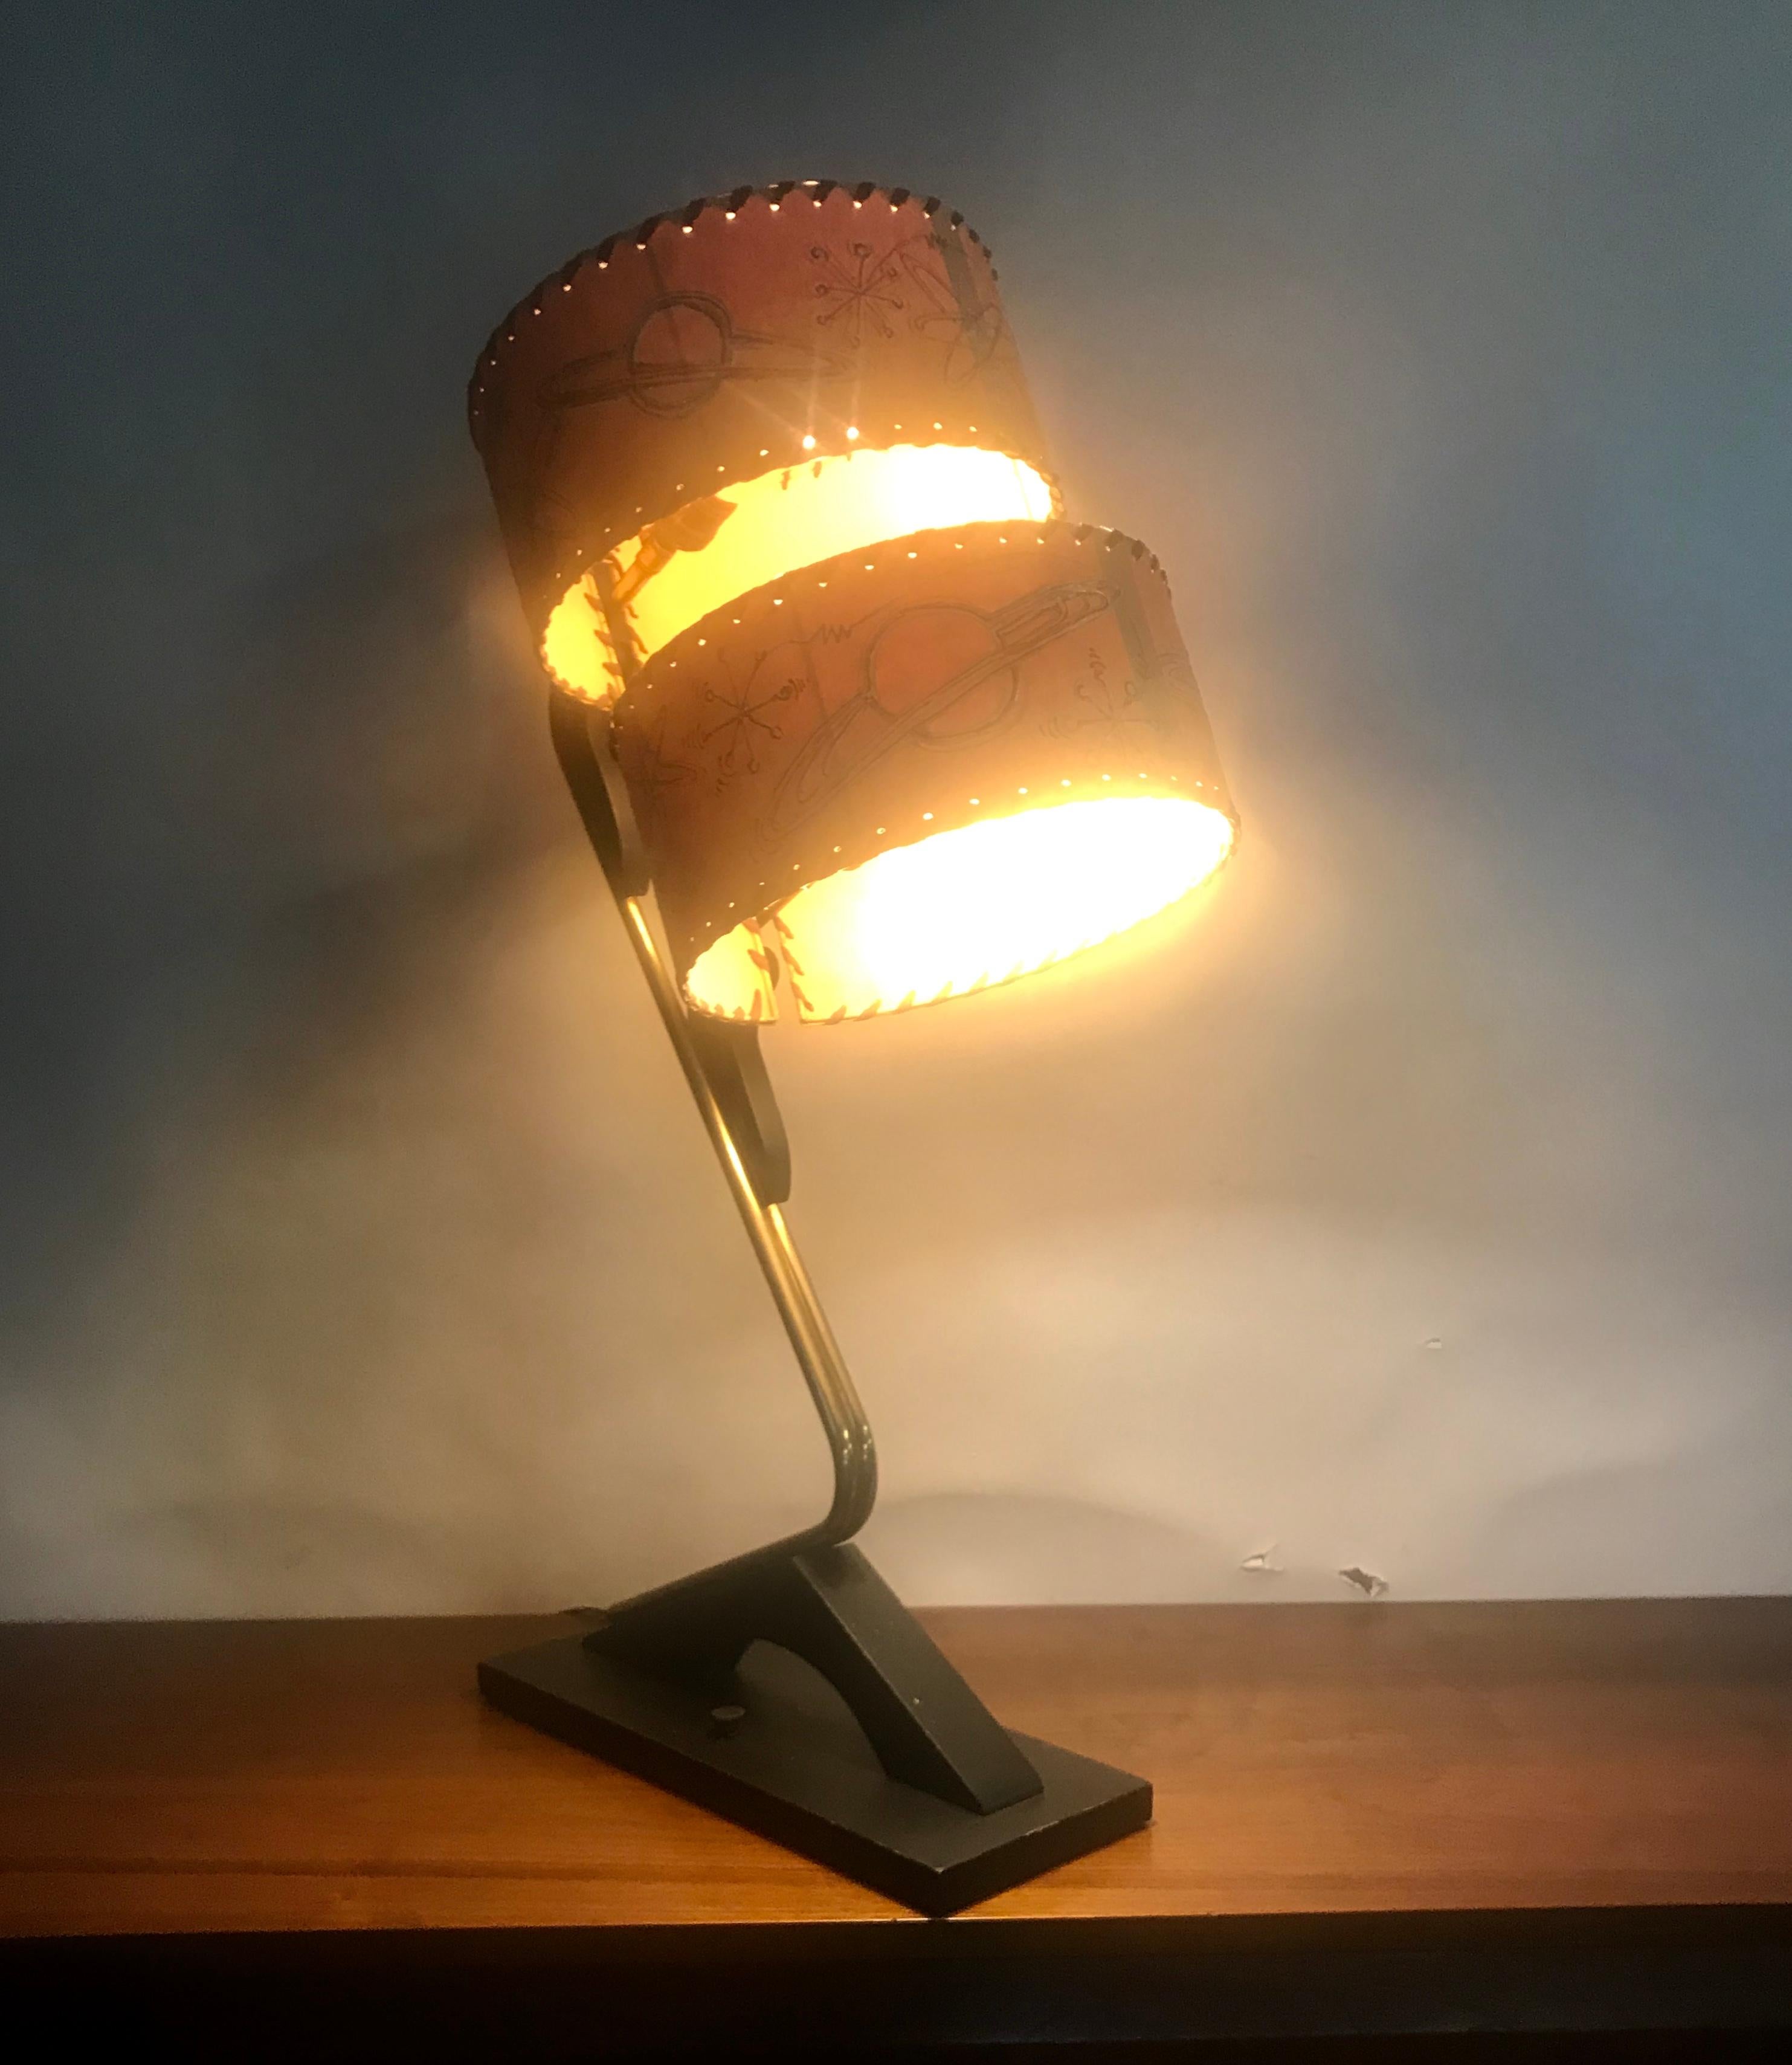 Unusual Mid-Century Modern Table Lamp by Majestic Lamp, Original Atomic Shades 1